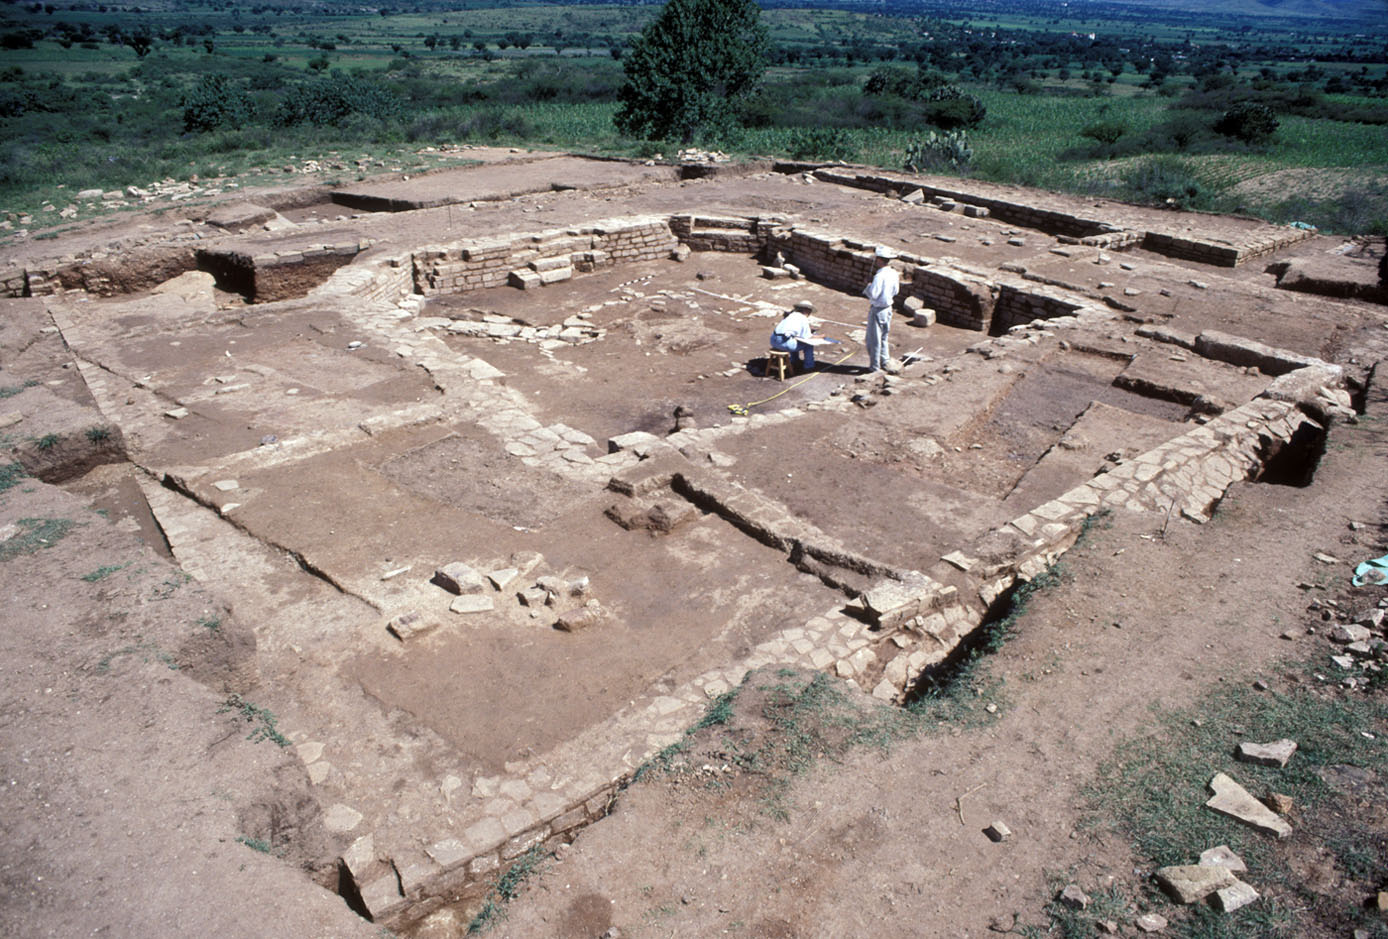 The residential portion of a royal palace in the Oaxaca Valley dating to 300-100 B.C.